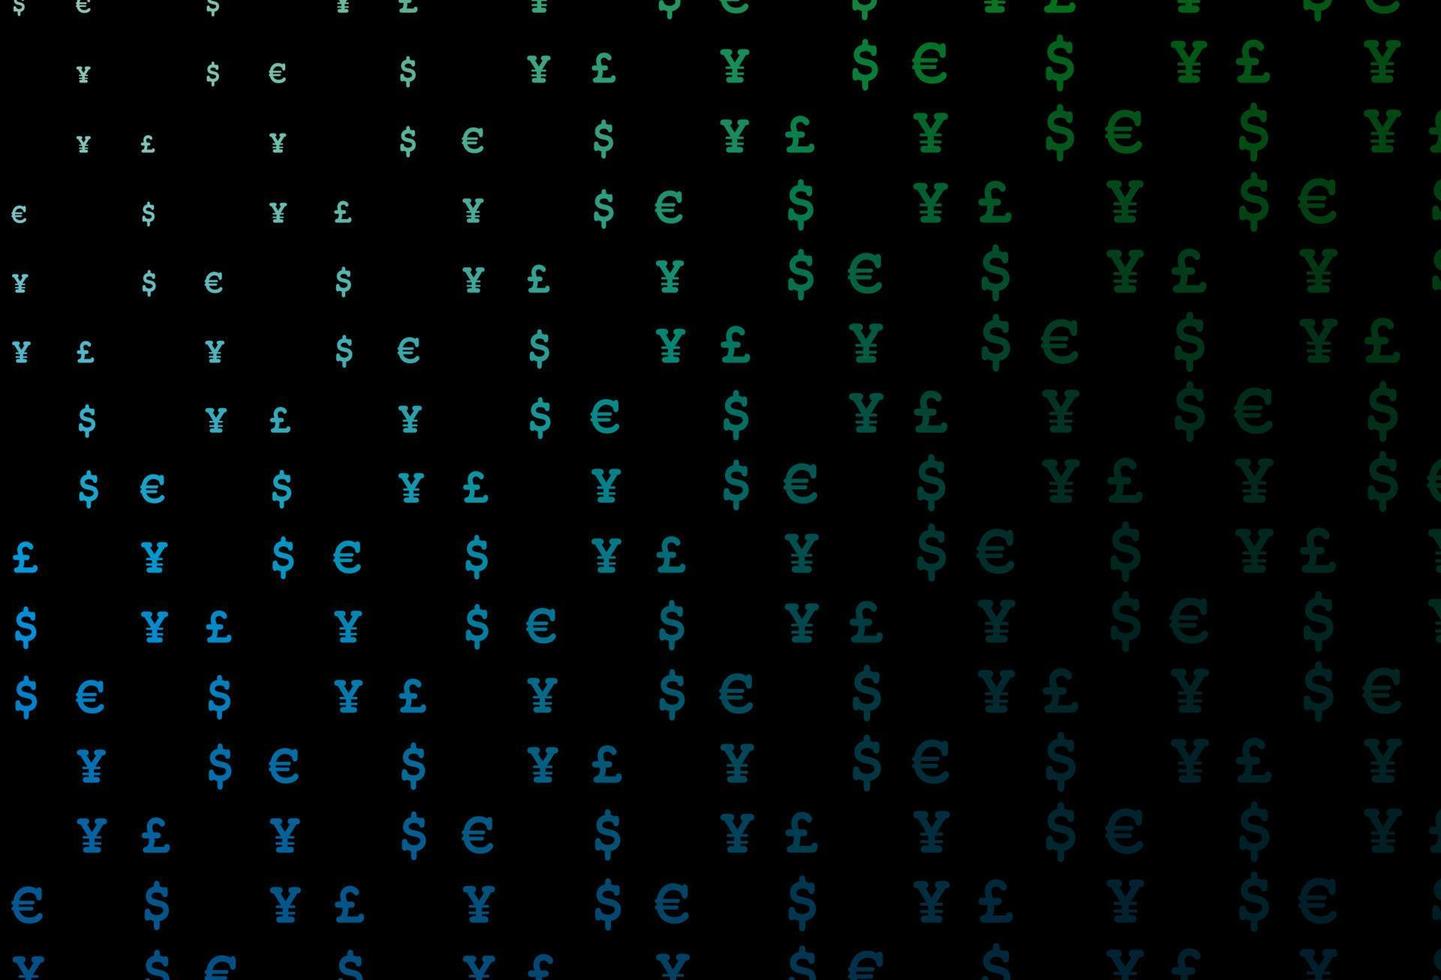 Dark blue, green vector background with EUR, USD, GBP, JPY.